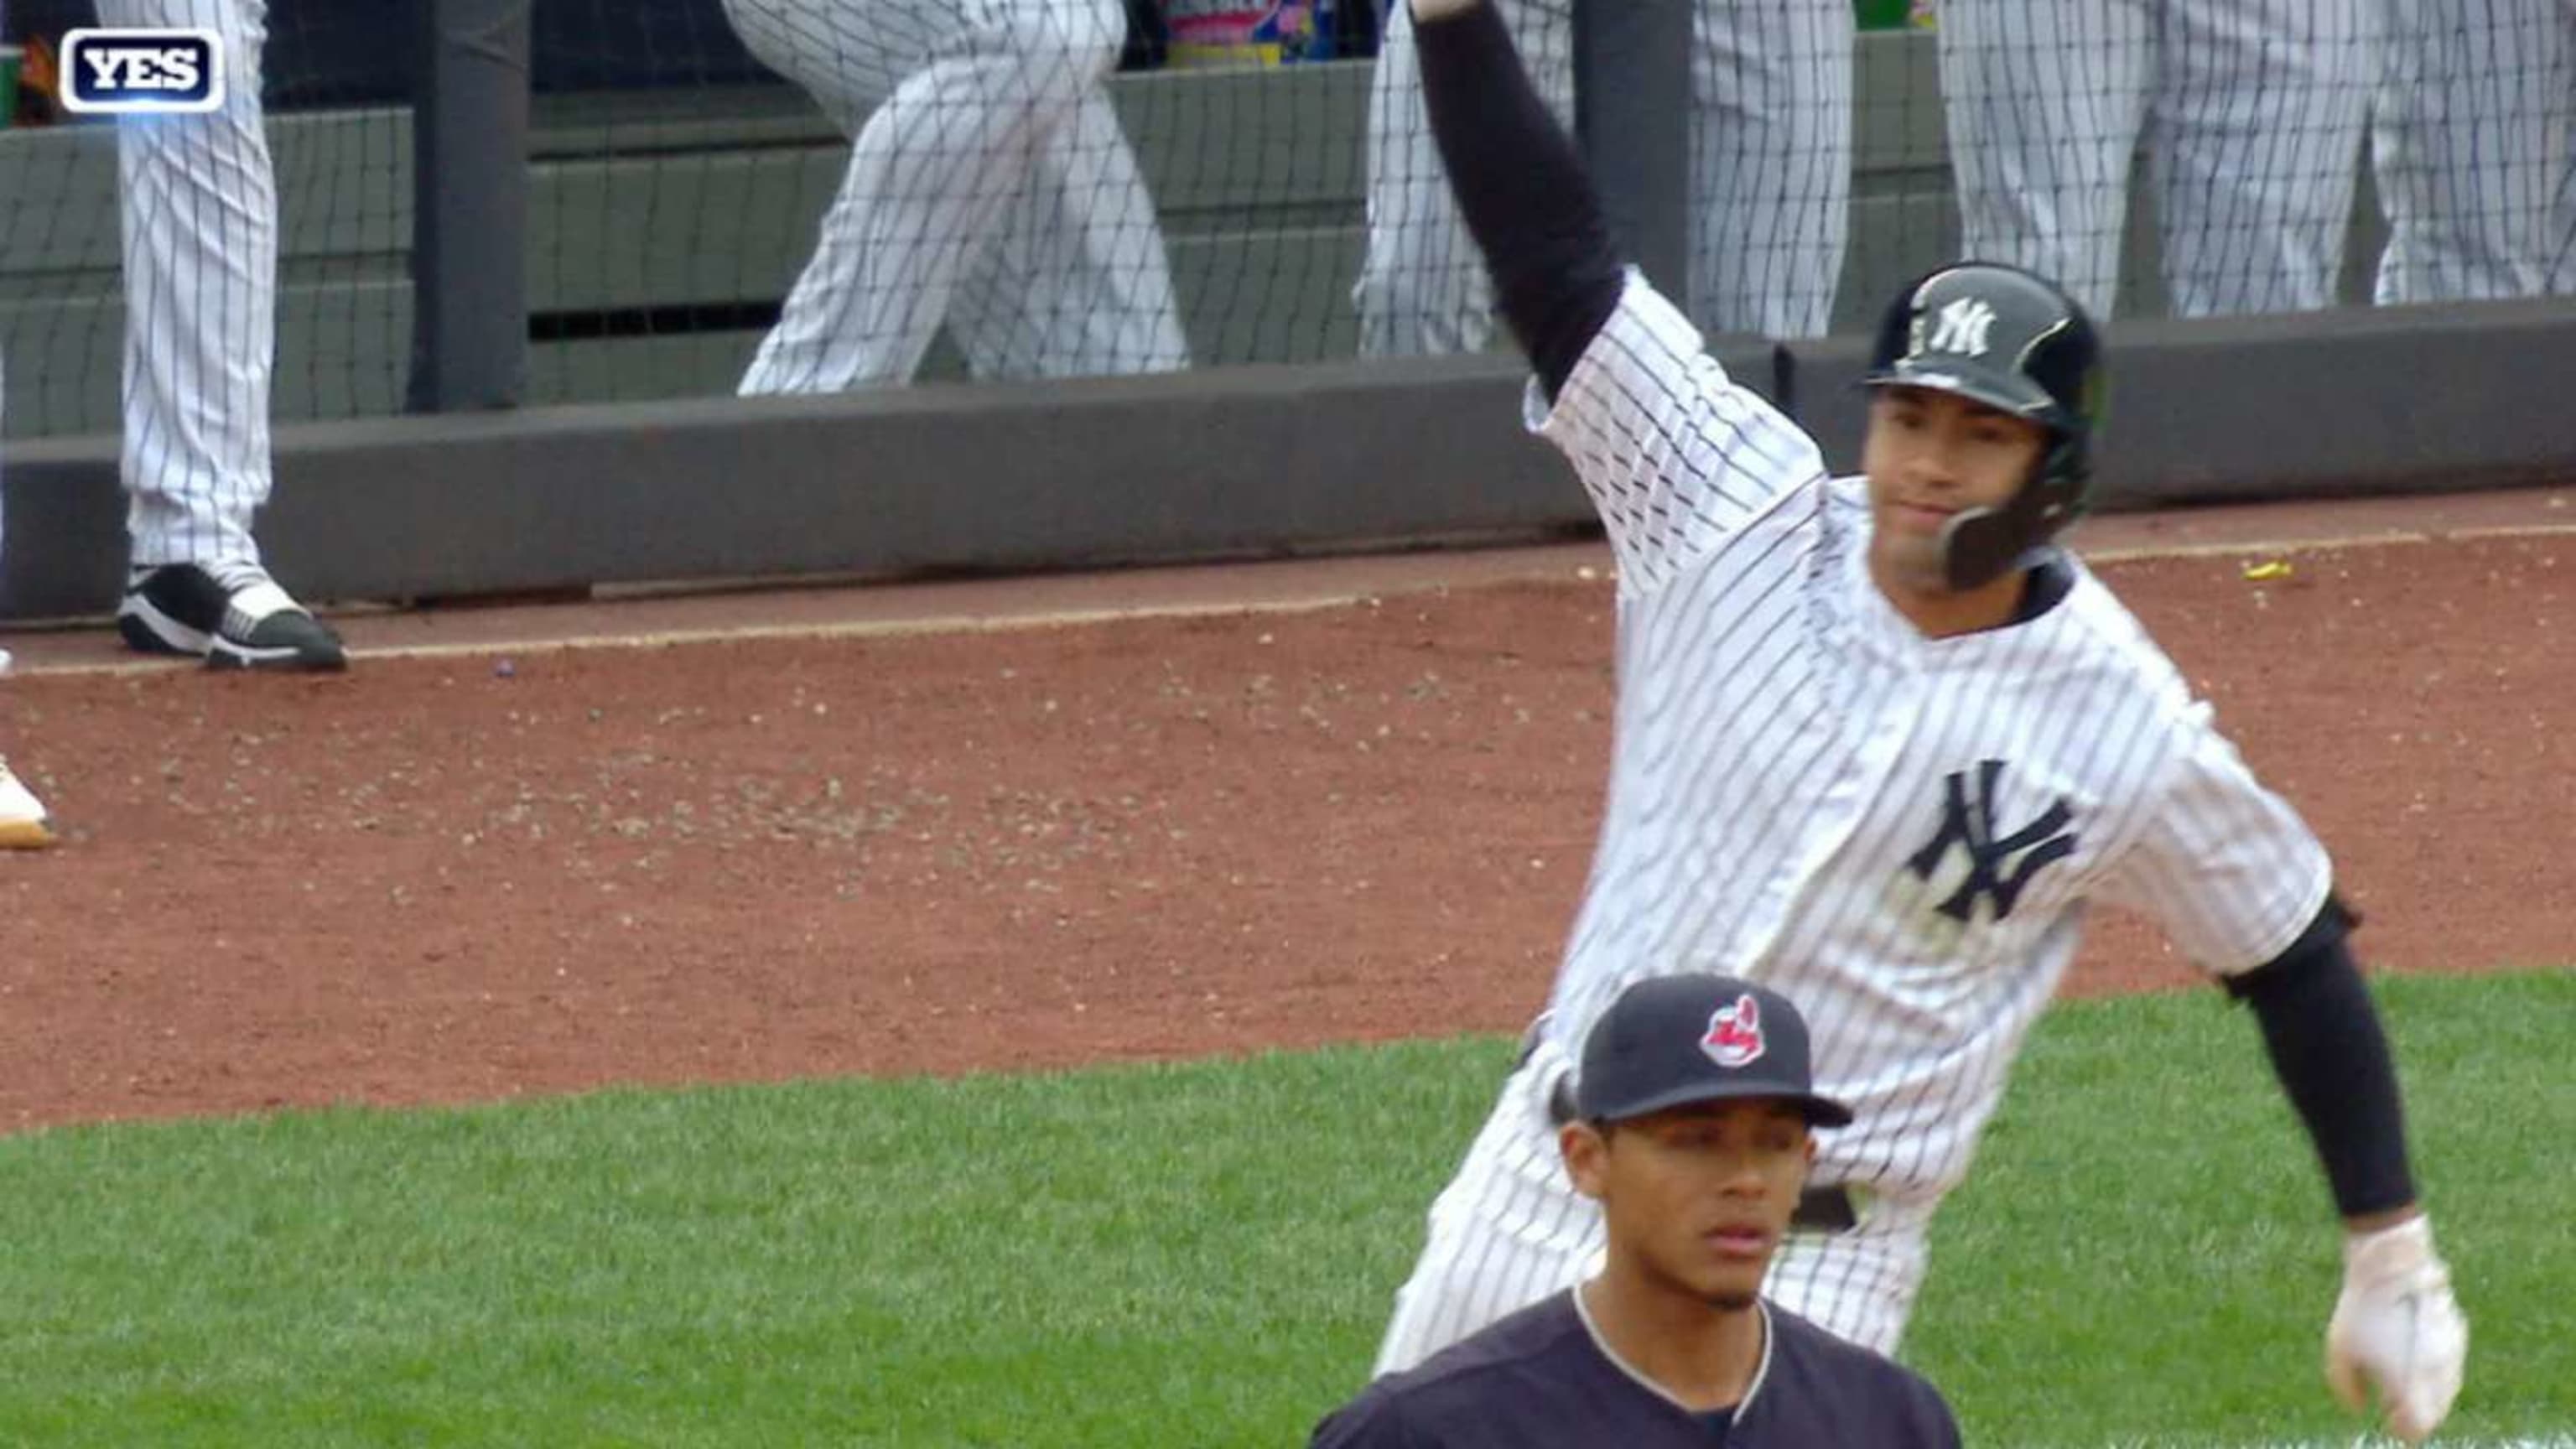 Gleyber Torres hit a walk-off homer and set off absolute bedlam at